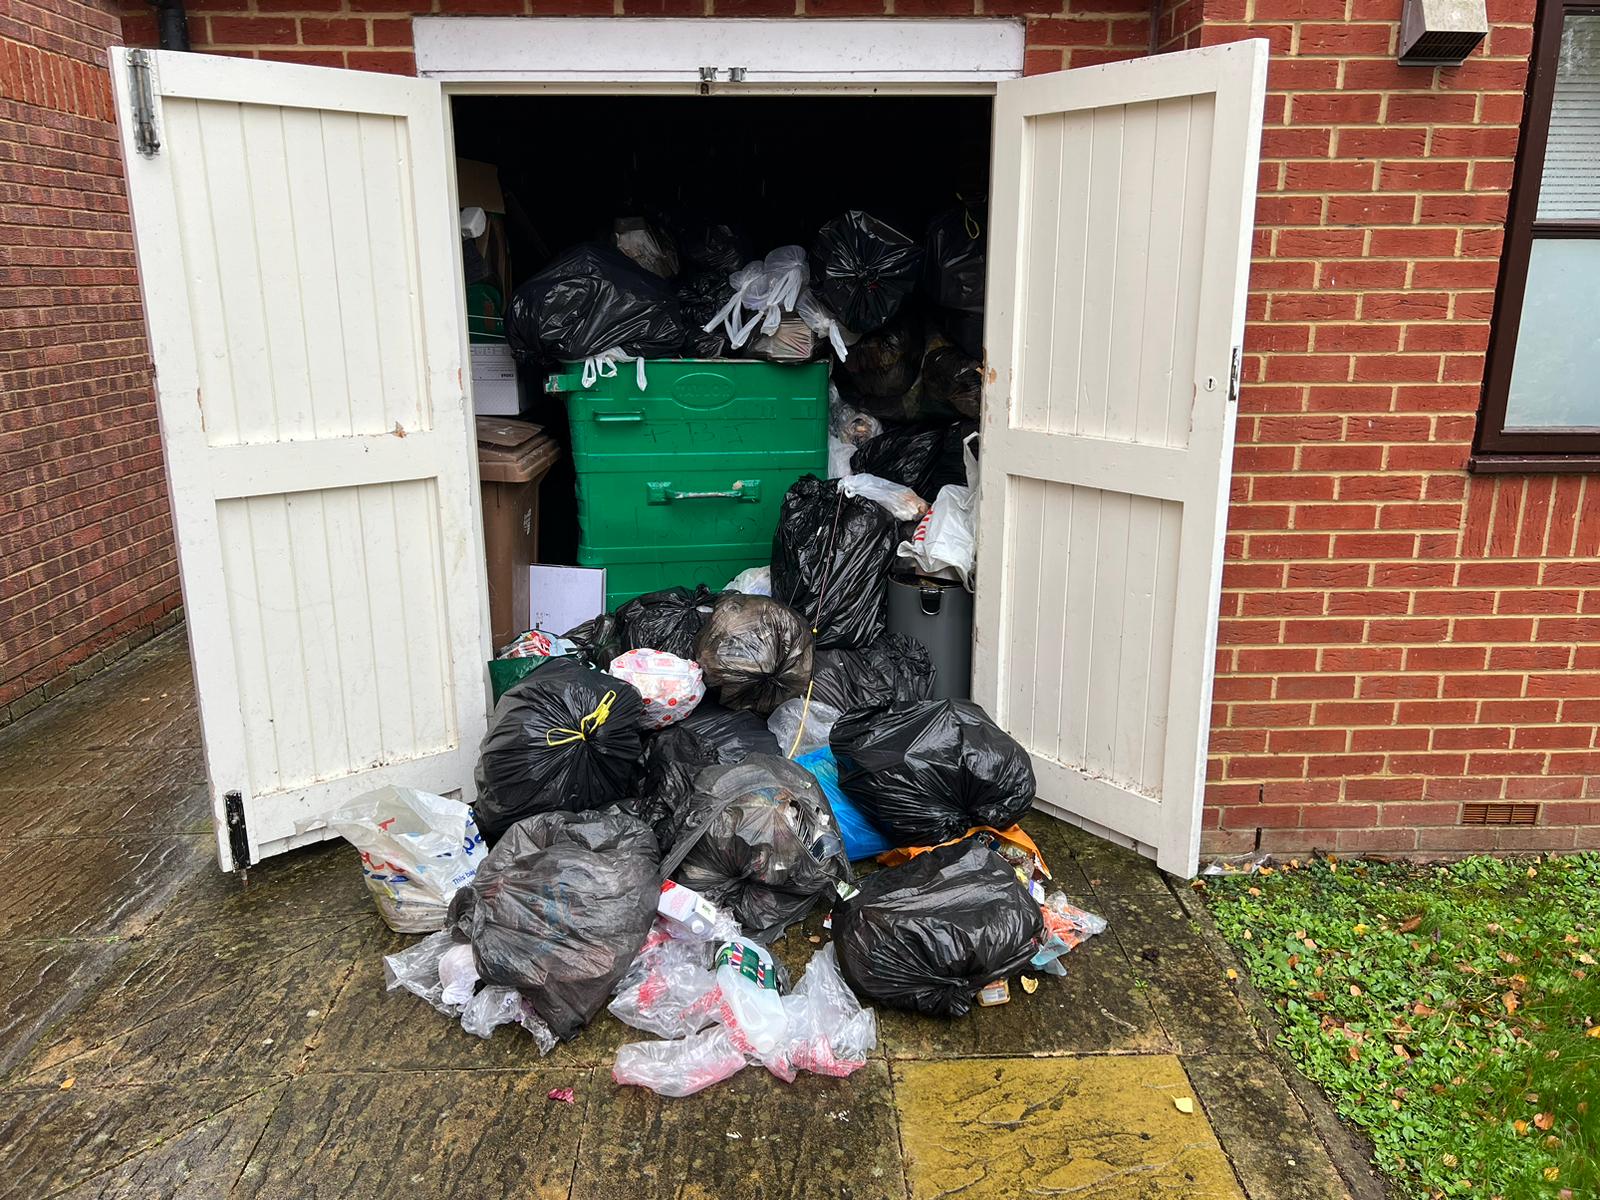 Commercial Rubbish Removal in London and Surrey Including bin stores, offices, factories, builders waste and more by EnviRecycle Ltd